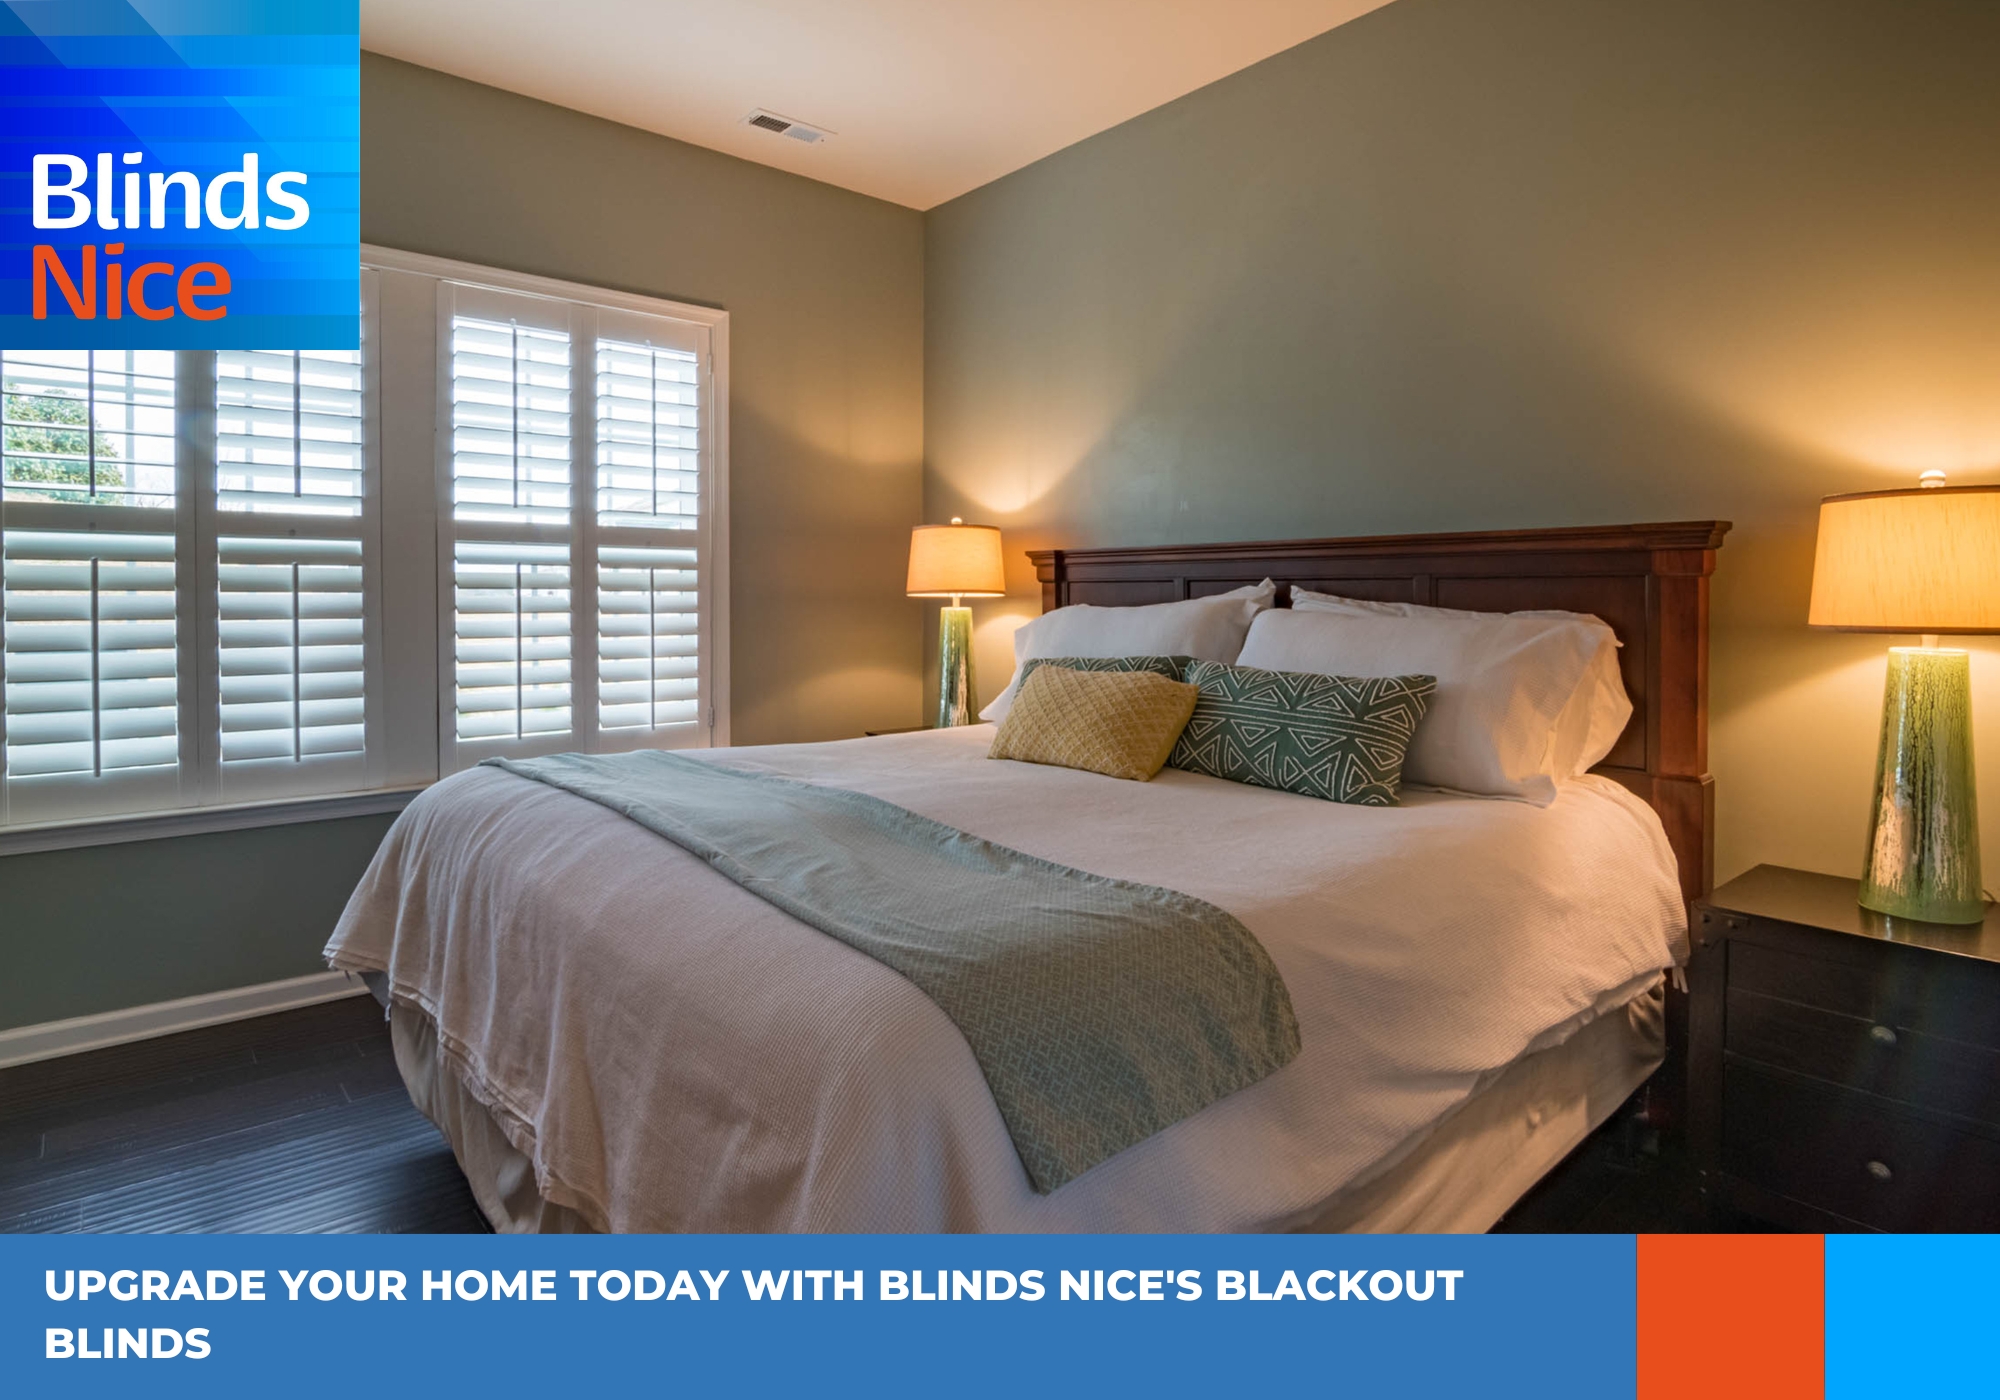 Upgrade your home today with Blinds Nice's blackout blinds